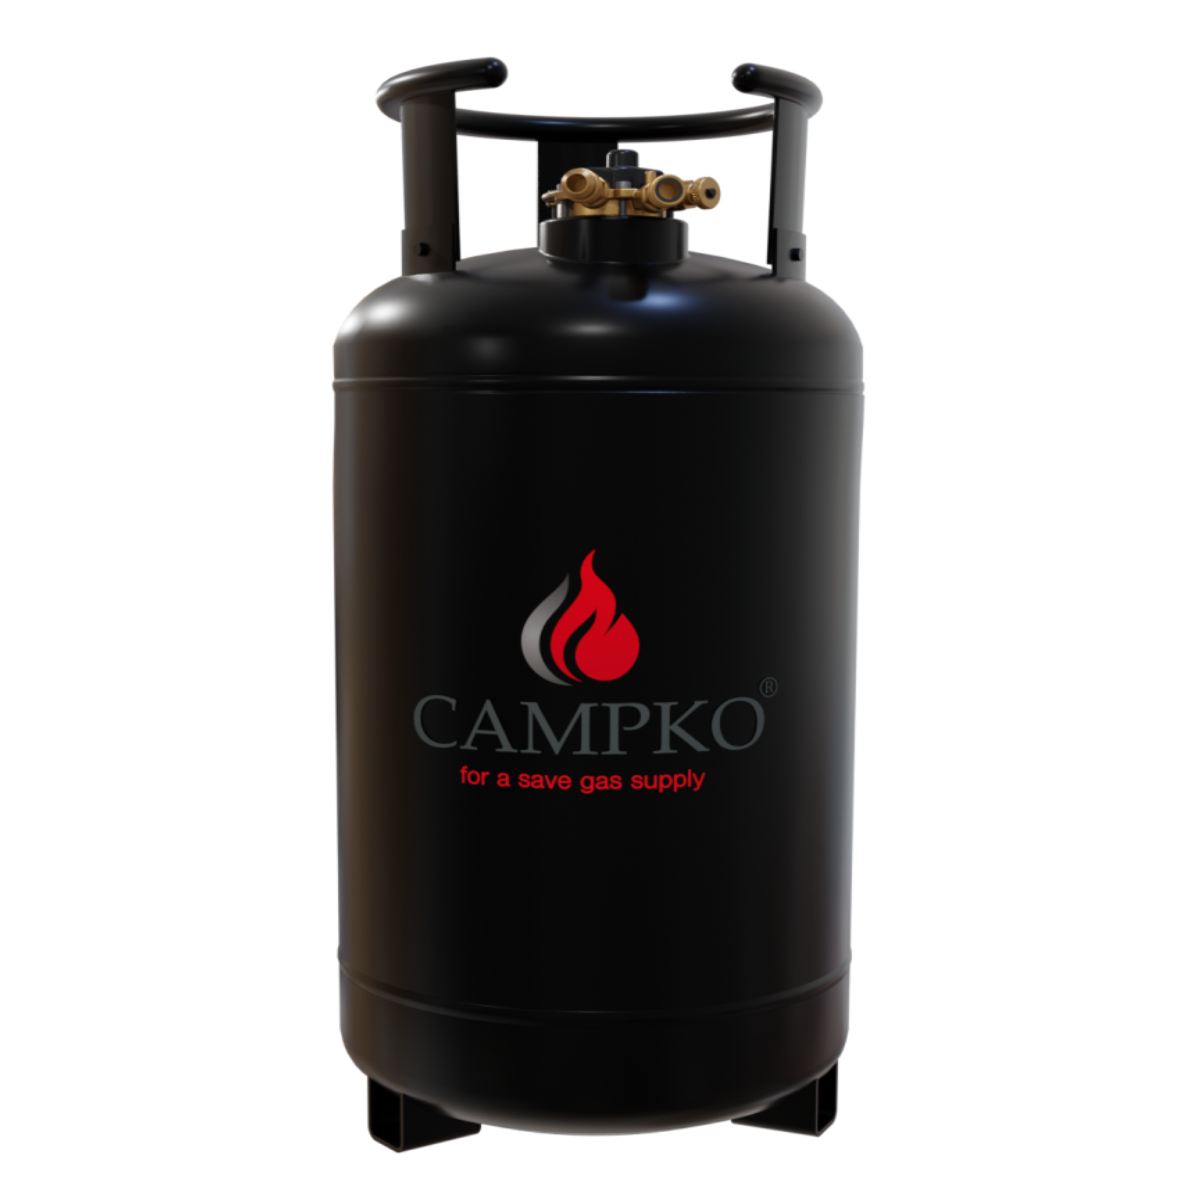 CAMPCO REFILLABLE GAS LPG BOTTLE 36 LTR (16KG) integrated multivalve with automatic 80% filling stop